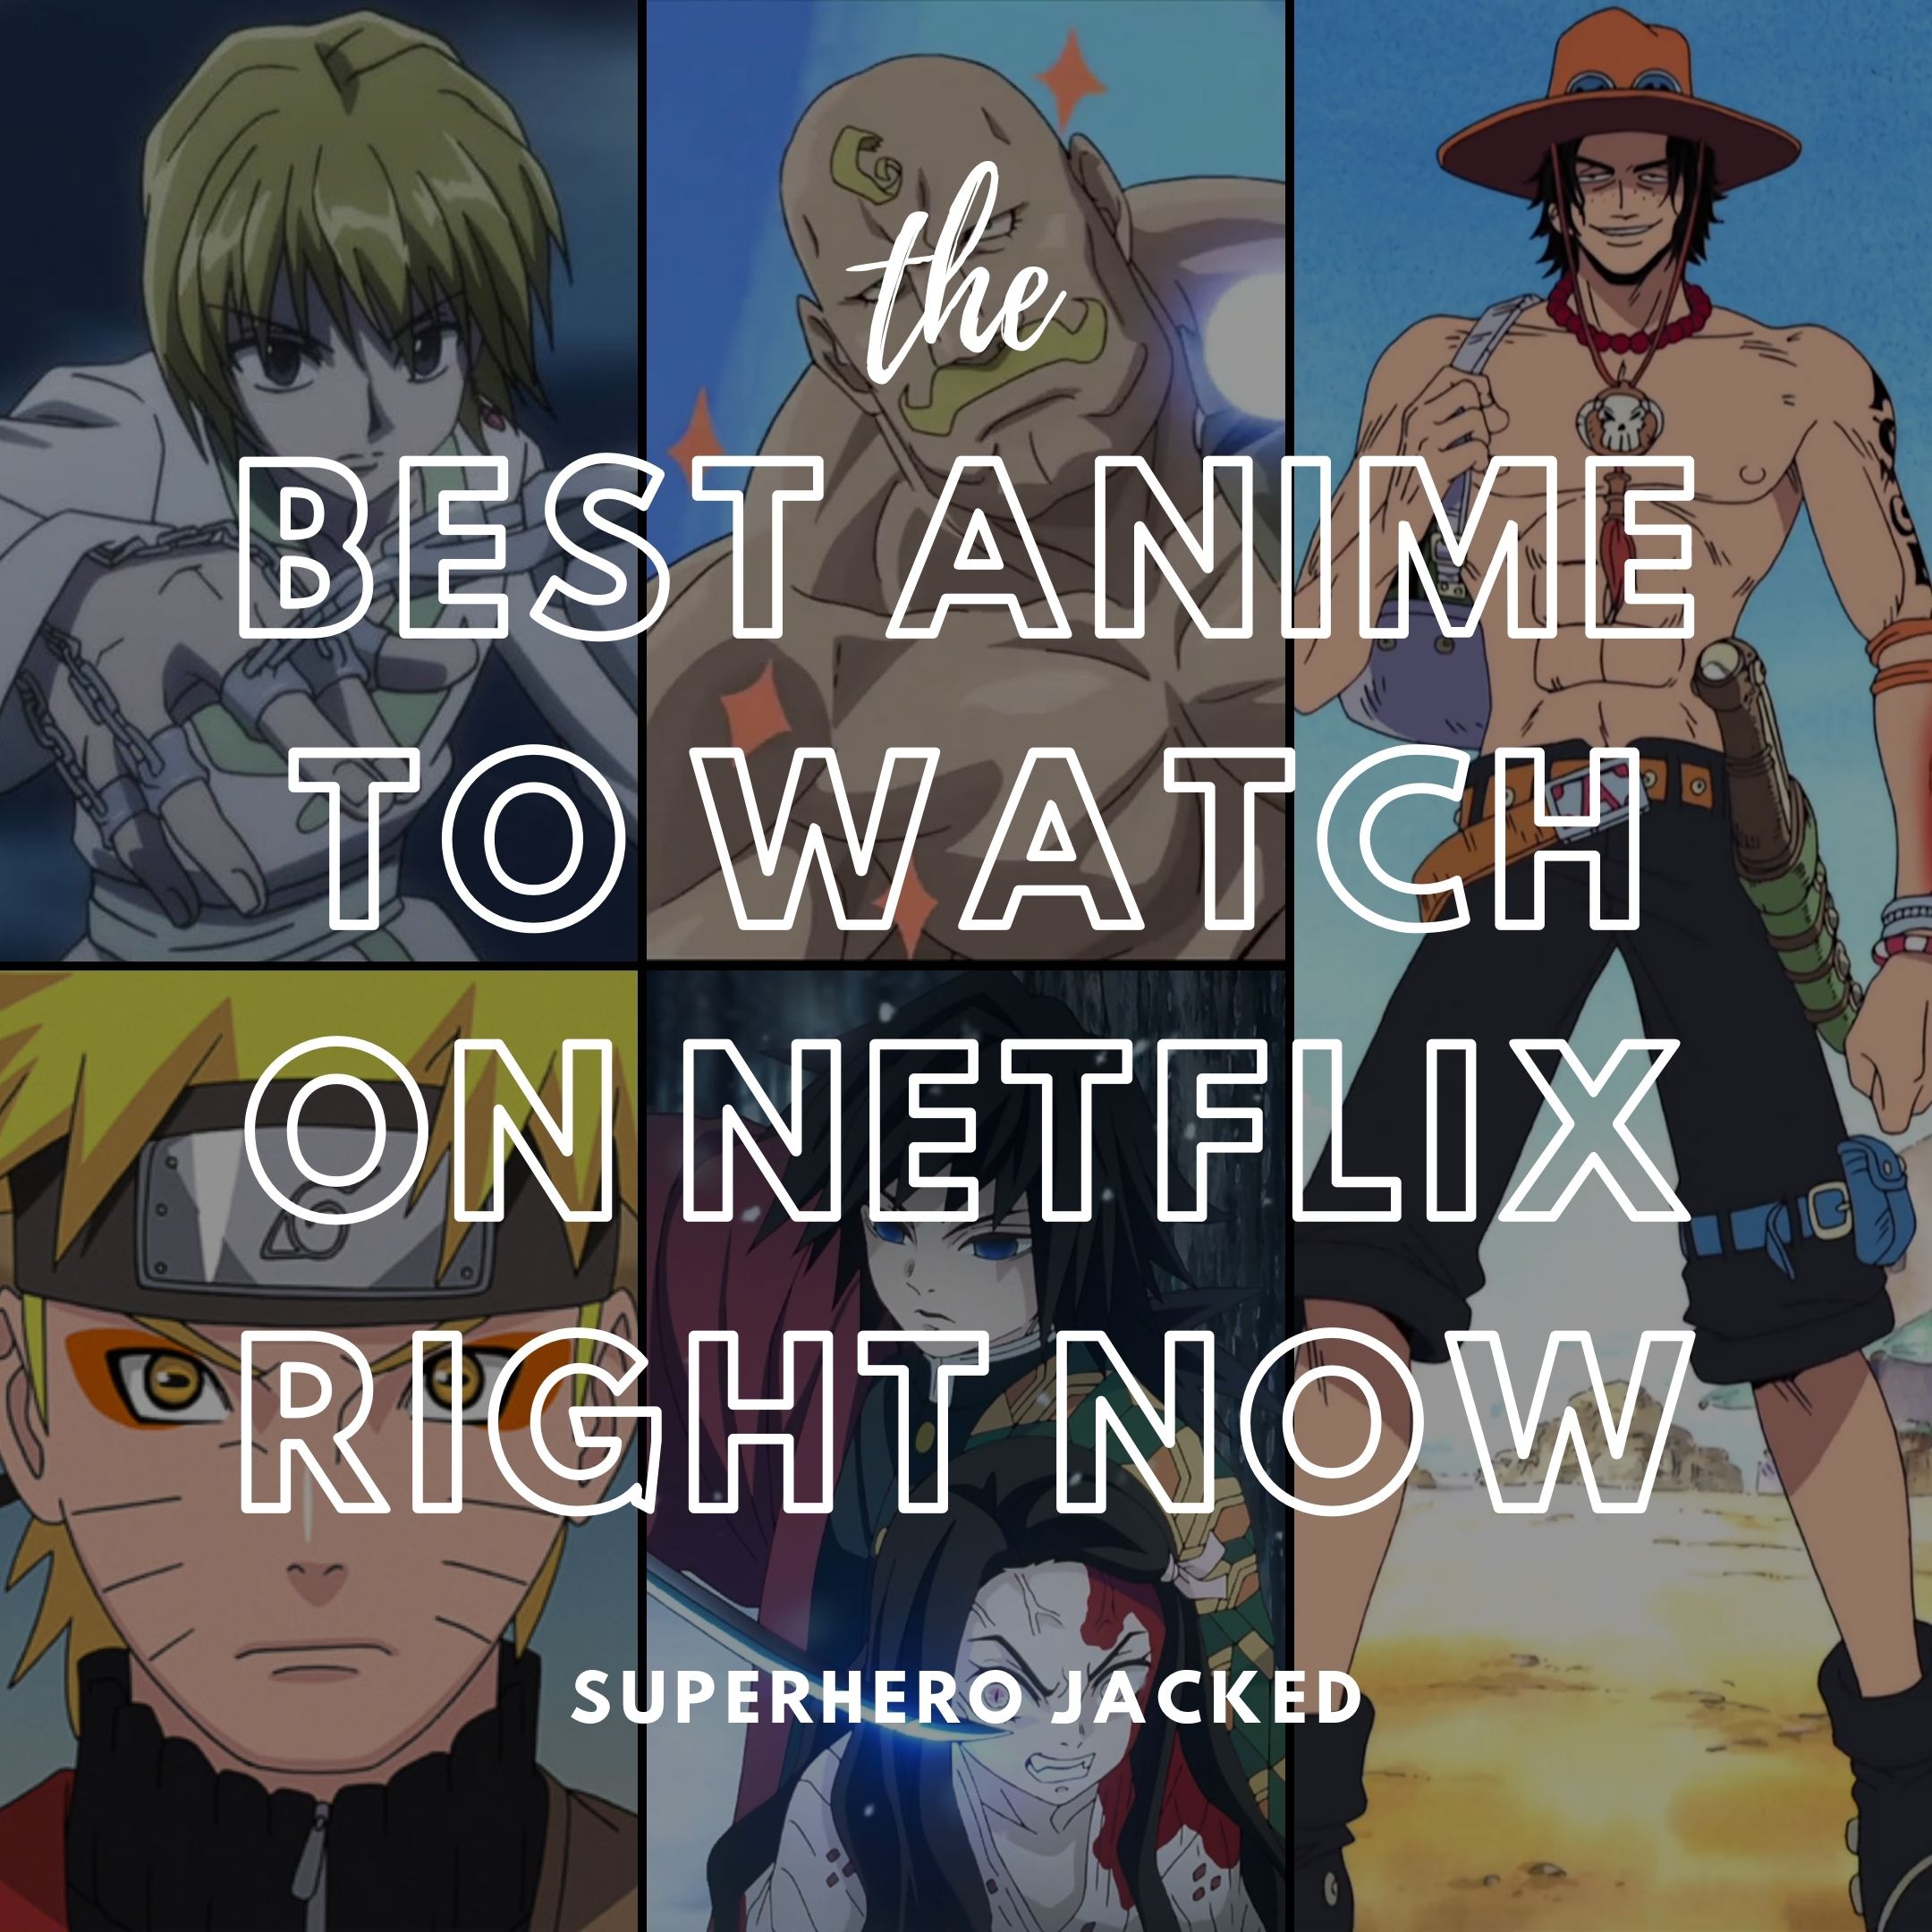 Best Anime to Watch on Netflix Right Now – Superhero Jacked